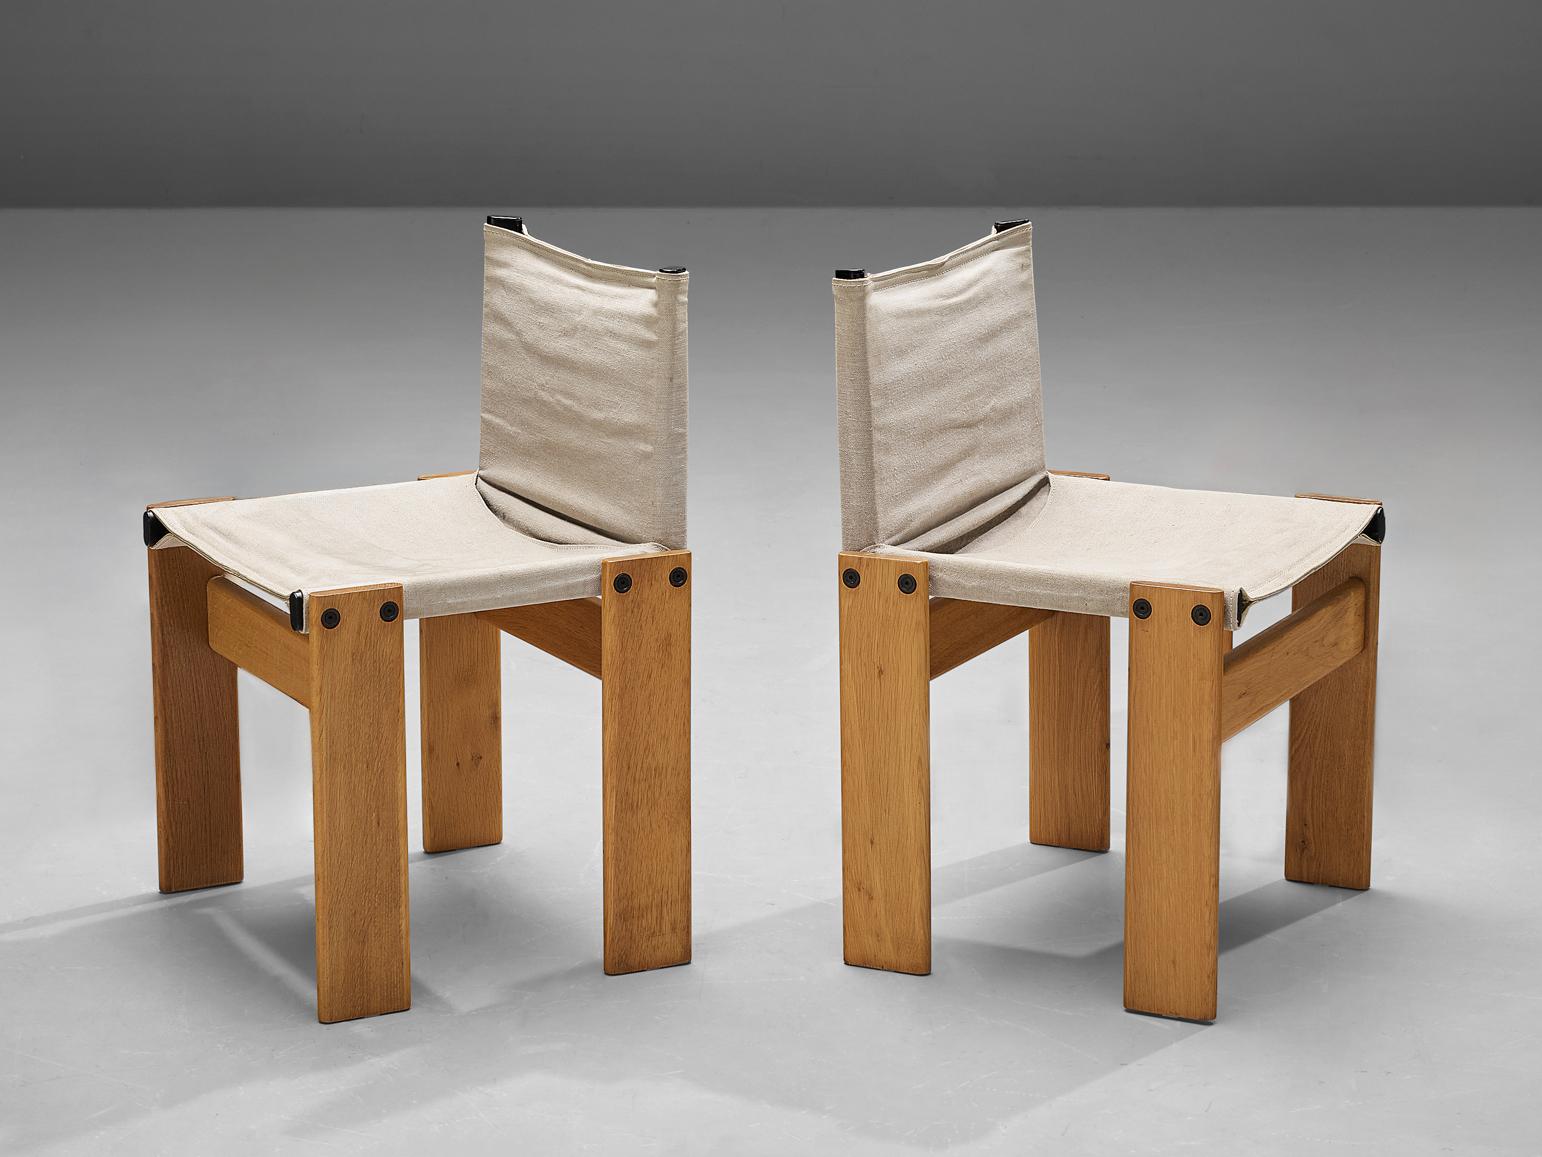 Afra & Tobia Scarpa for Molteni, pair of 'Monk' dining chairs, oak, canvas, Italy, designed in 1974 

The light canvas forms a striking combination with the blond wood. Interesting is the 'flat' shape of this chair where the designer has chosen to